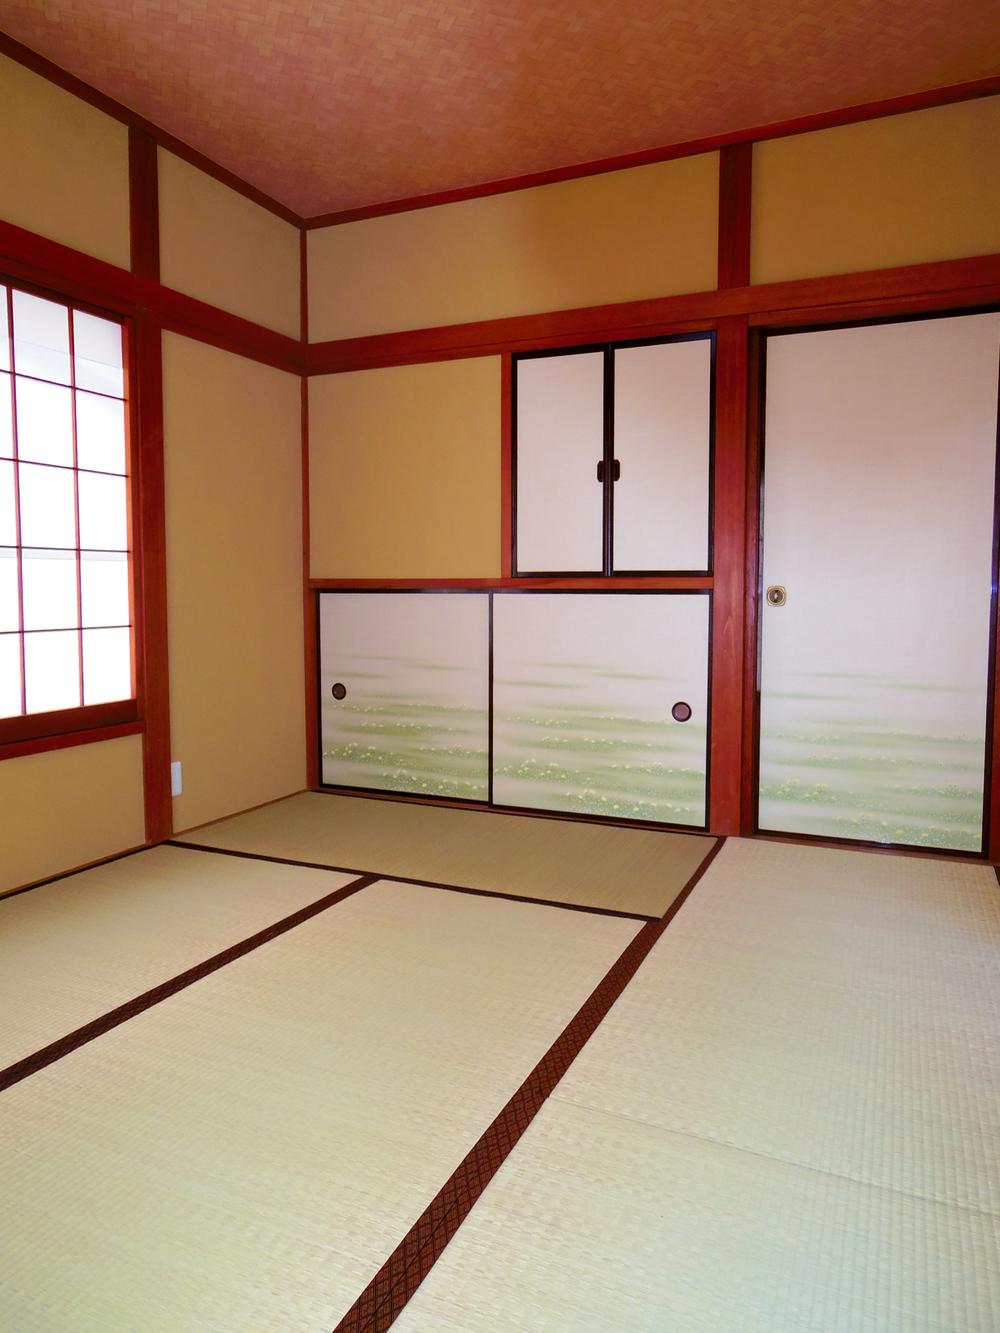 Non-living room. First floor Japanese-style room (storage also are equipped to perfection)